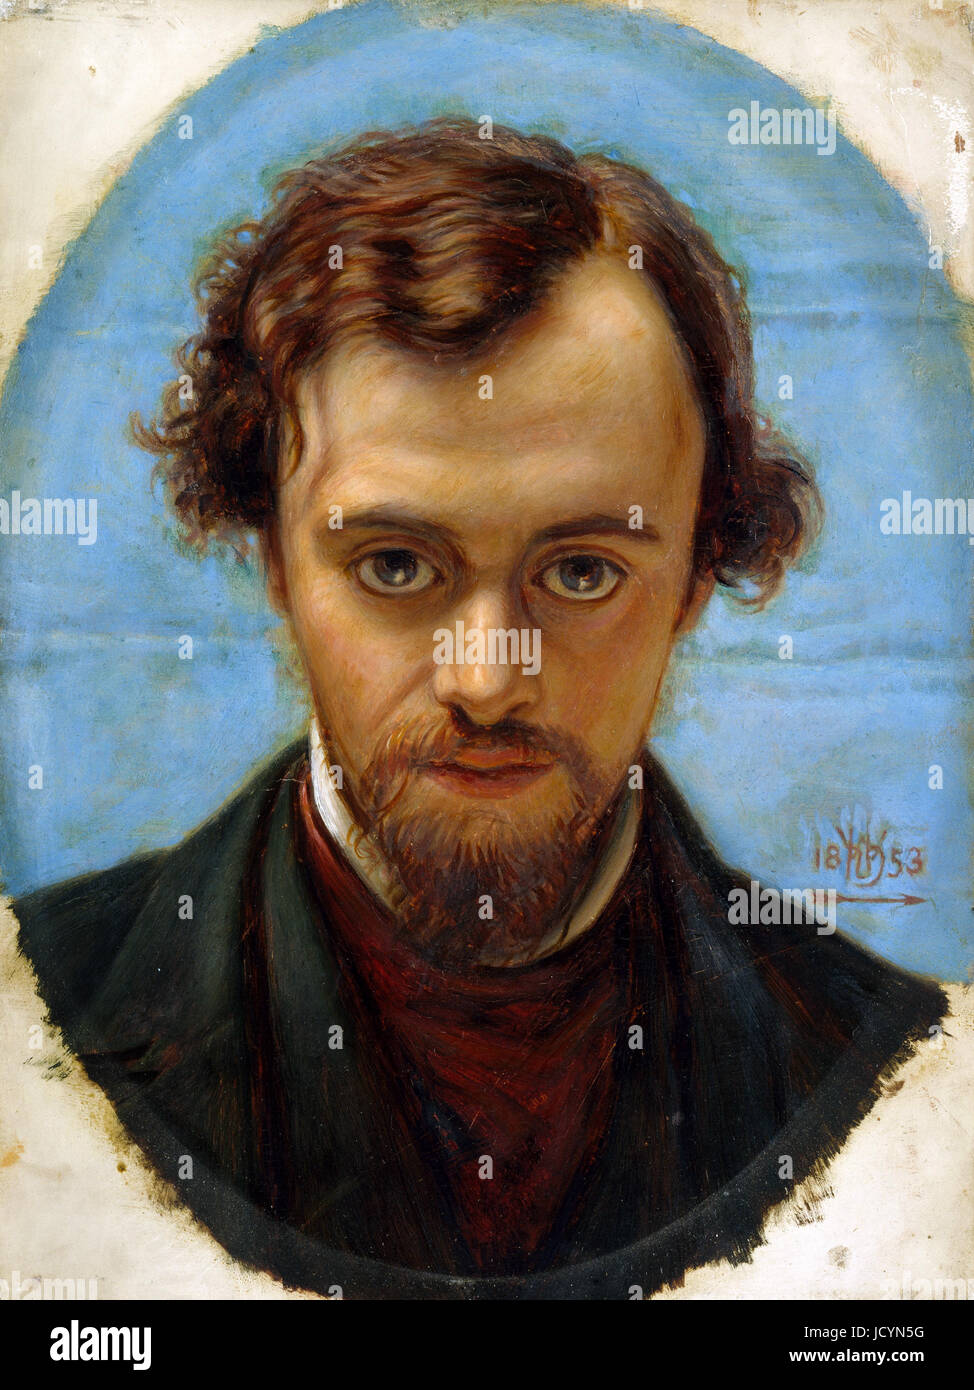 William Holman Hunt, Portrait of Dante Gabriel Rossetti at 22 years of Age. 1882-1883 Oil on panel. Birmingham Museum and Art Gallery, England. Stock Photo